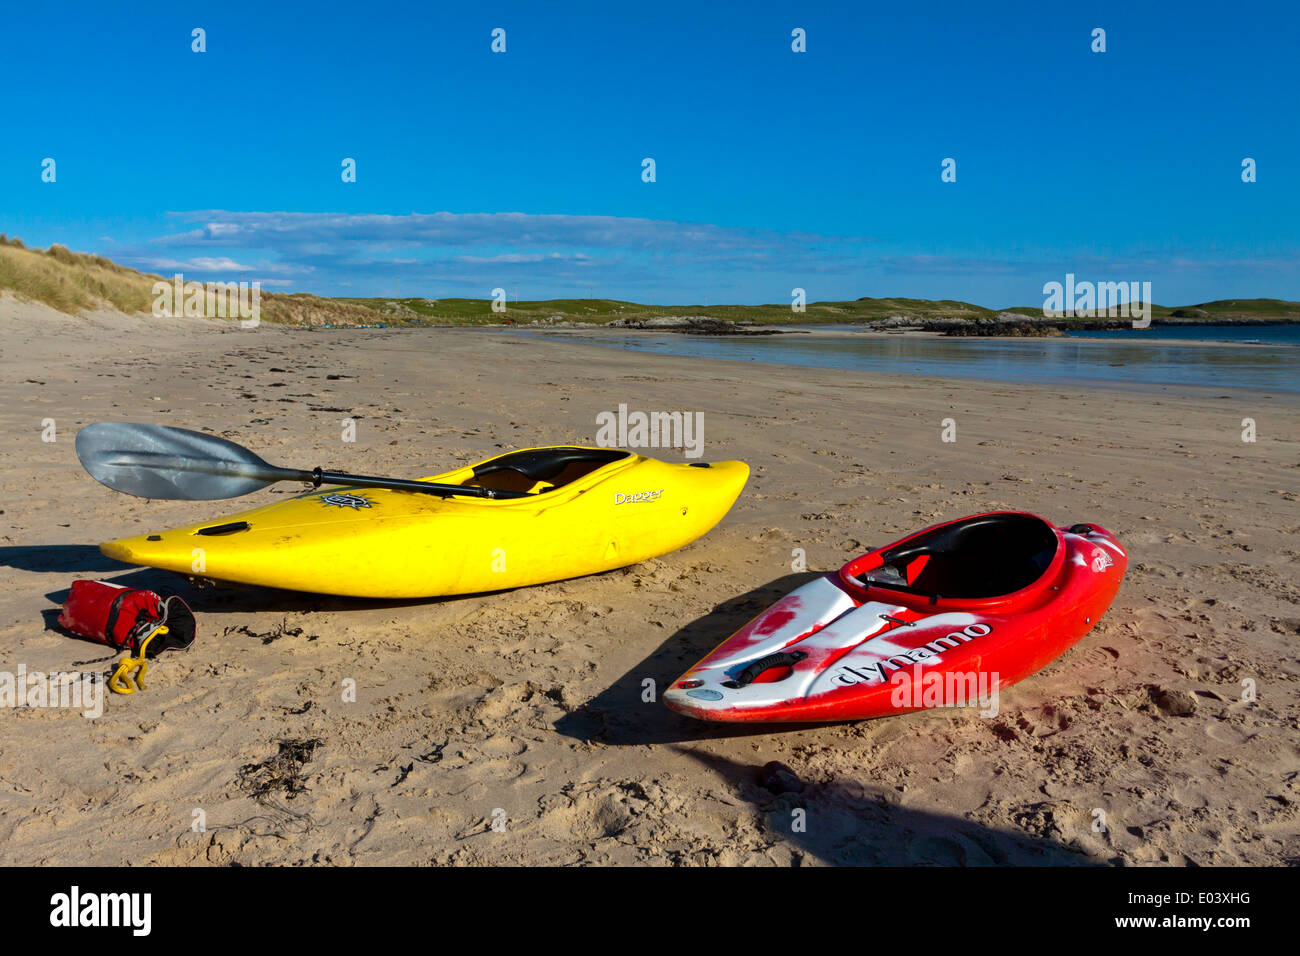 Red and yellow kayaks on a deserted sandy beach with sea and sky in the background Stock Photo